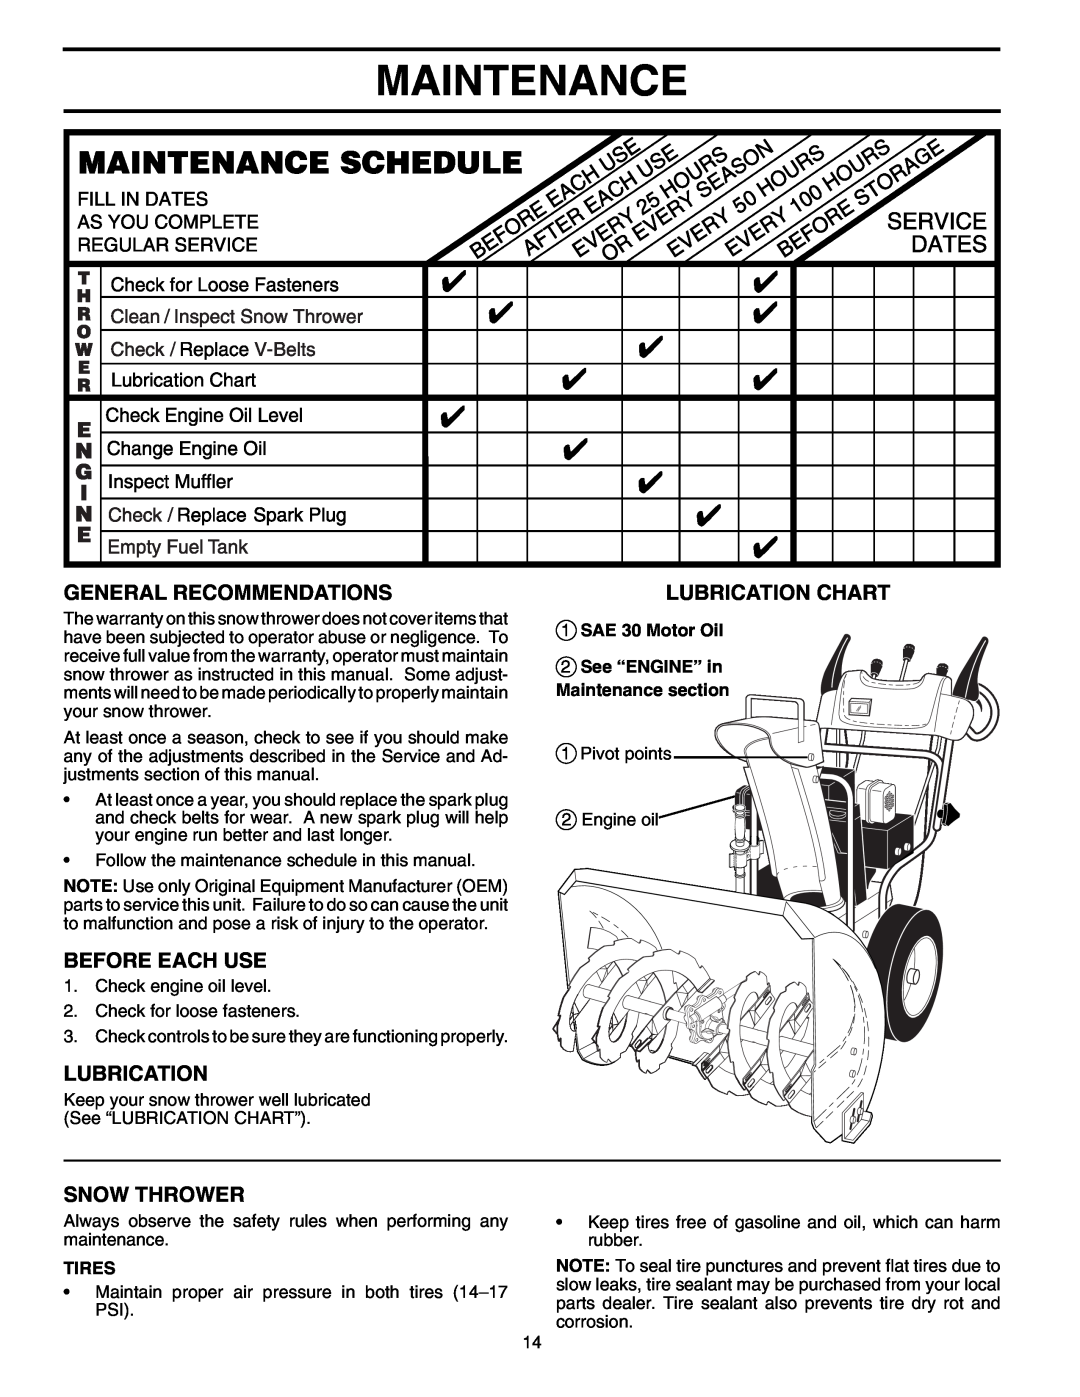 Husqvarna 9527SBEB Maintenance, General Recommendations, Before Each Use, Snow Thrower, Lubrication Chart, Tires 